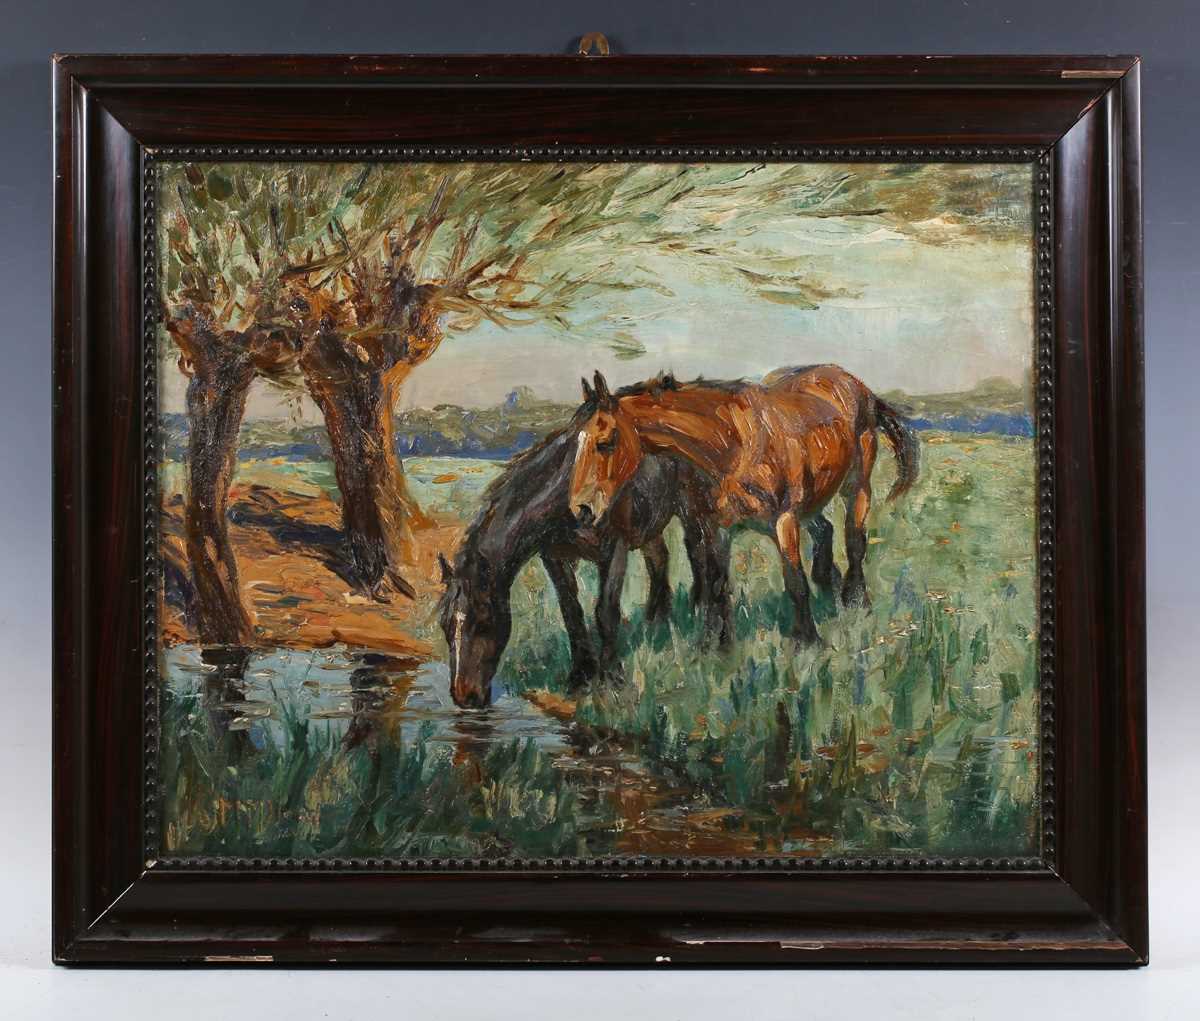 Margaret Neame – Horses watering, early 20th century oil on canvas, signed, 49cm x 62cm, within a - Image 2 of 4